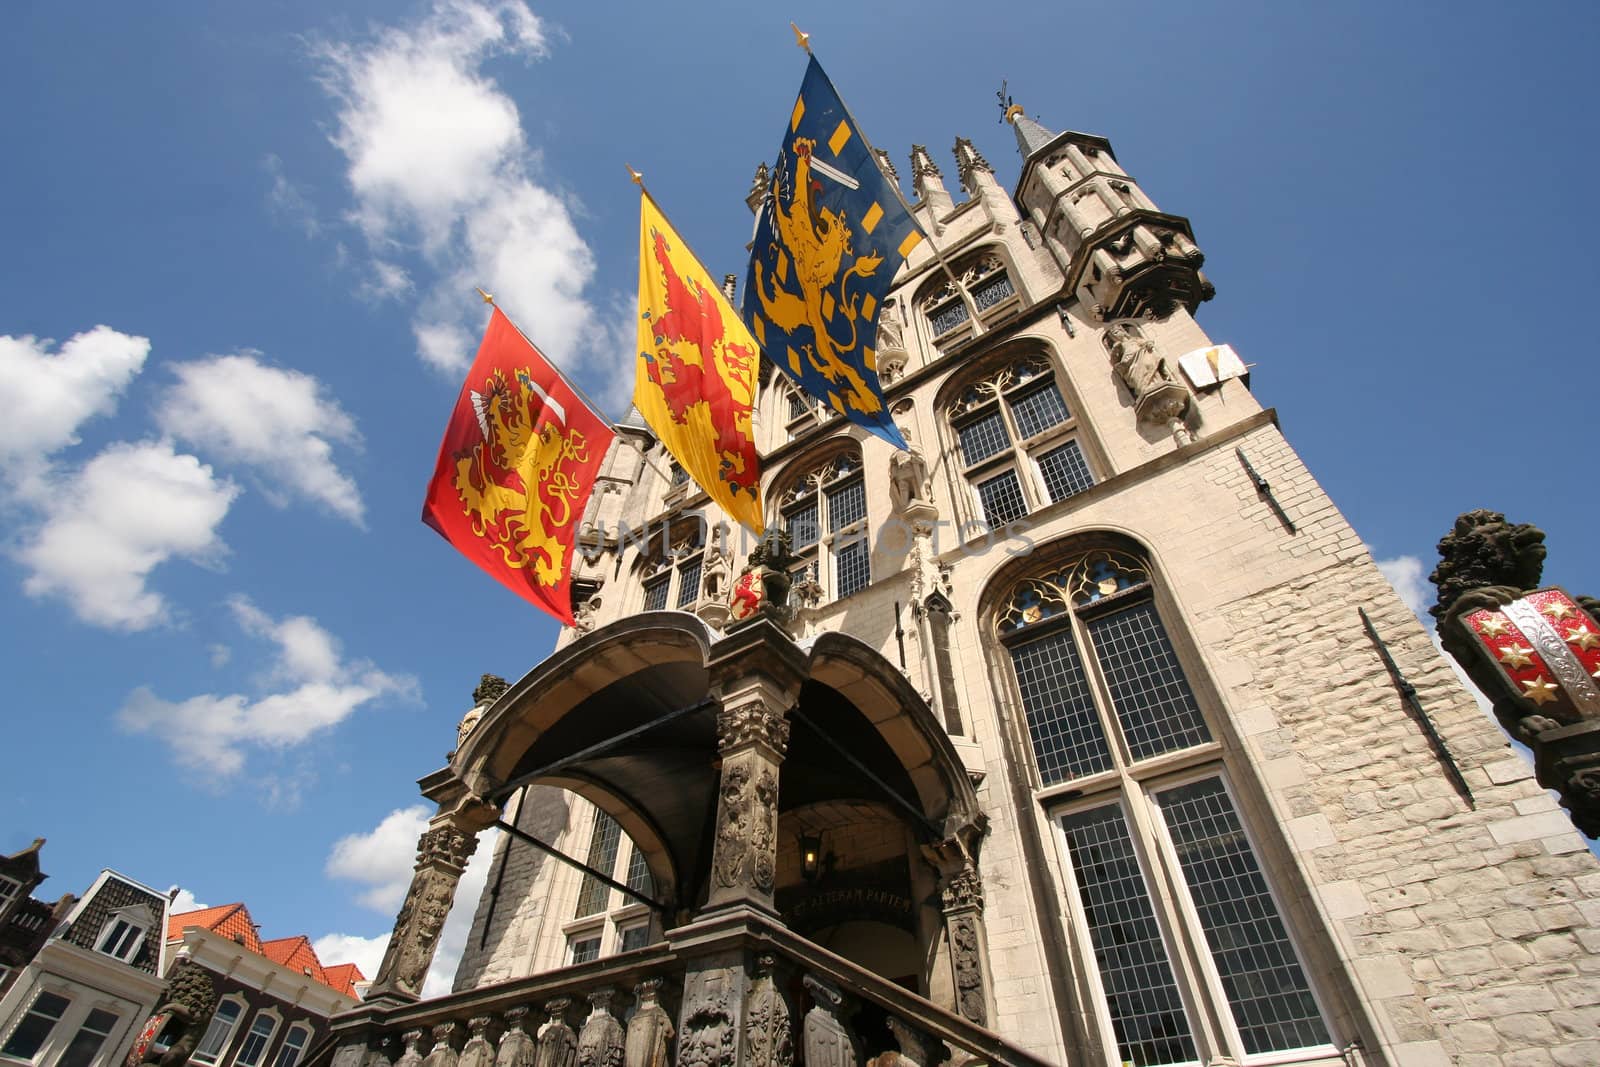 City Hall of Gouda in Holland